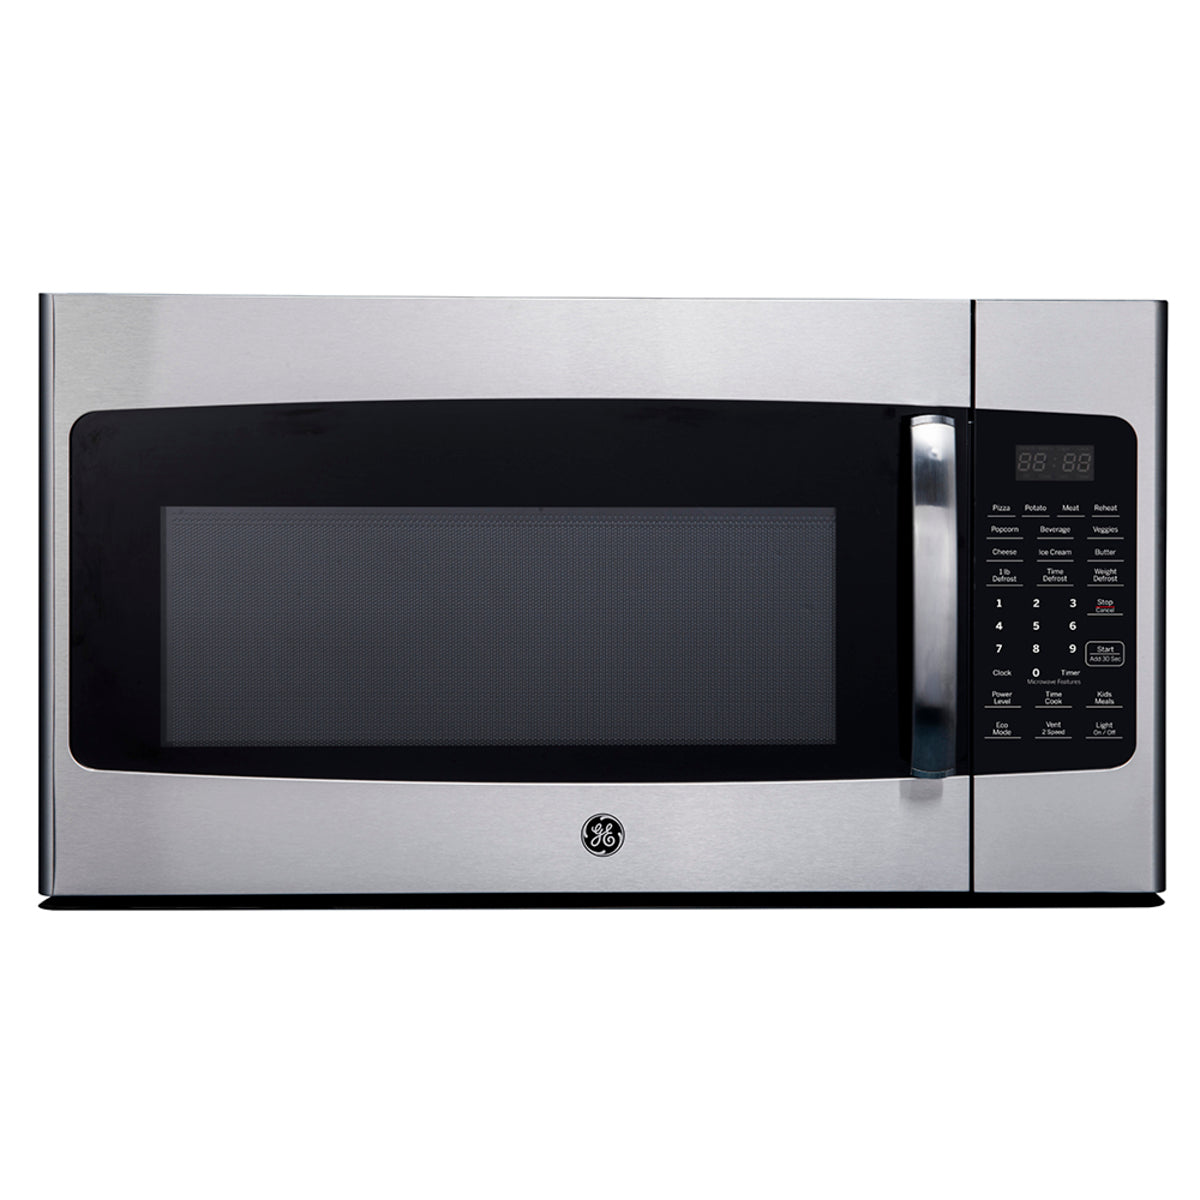 GE - 1.6 cu. Ft  Over the range Microwave in Stainless - JVM2165SMSS